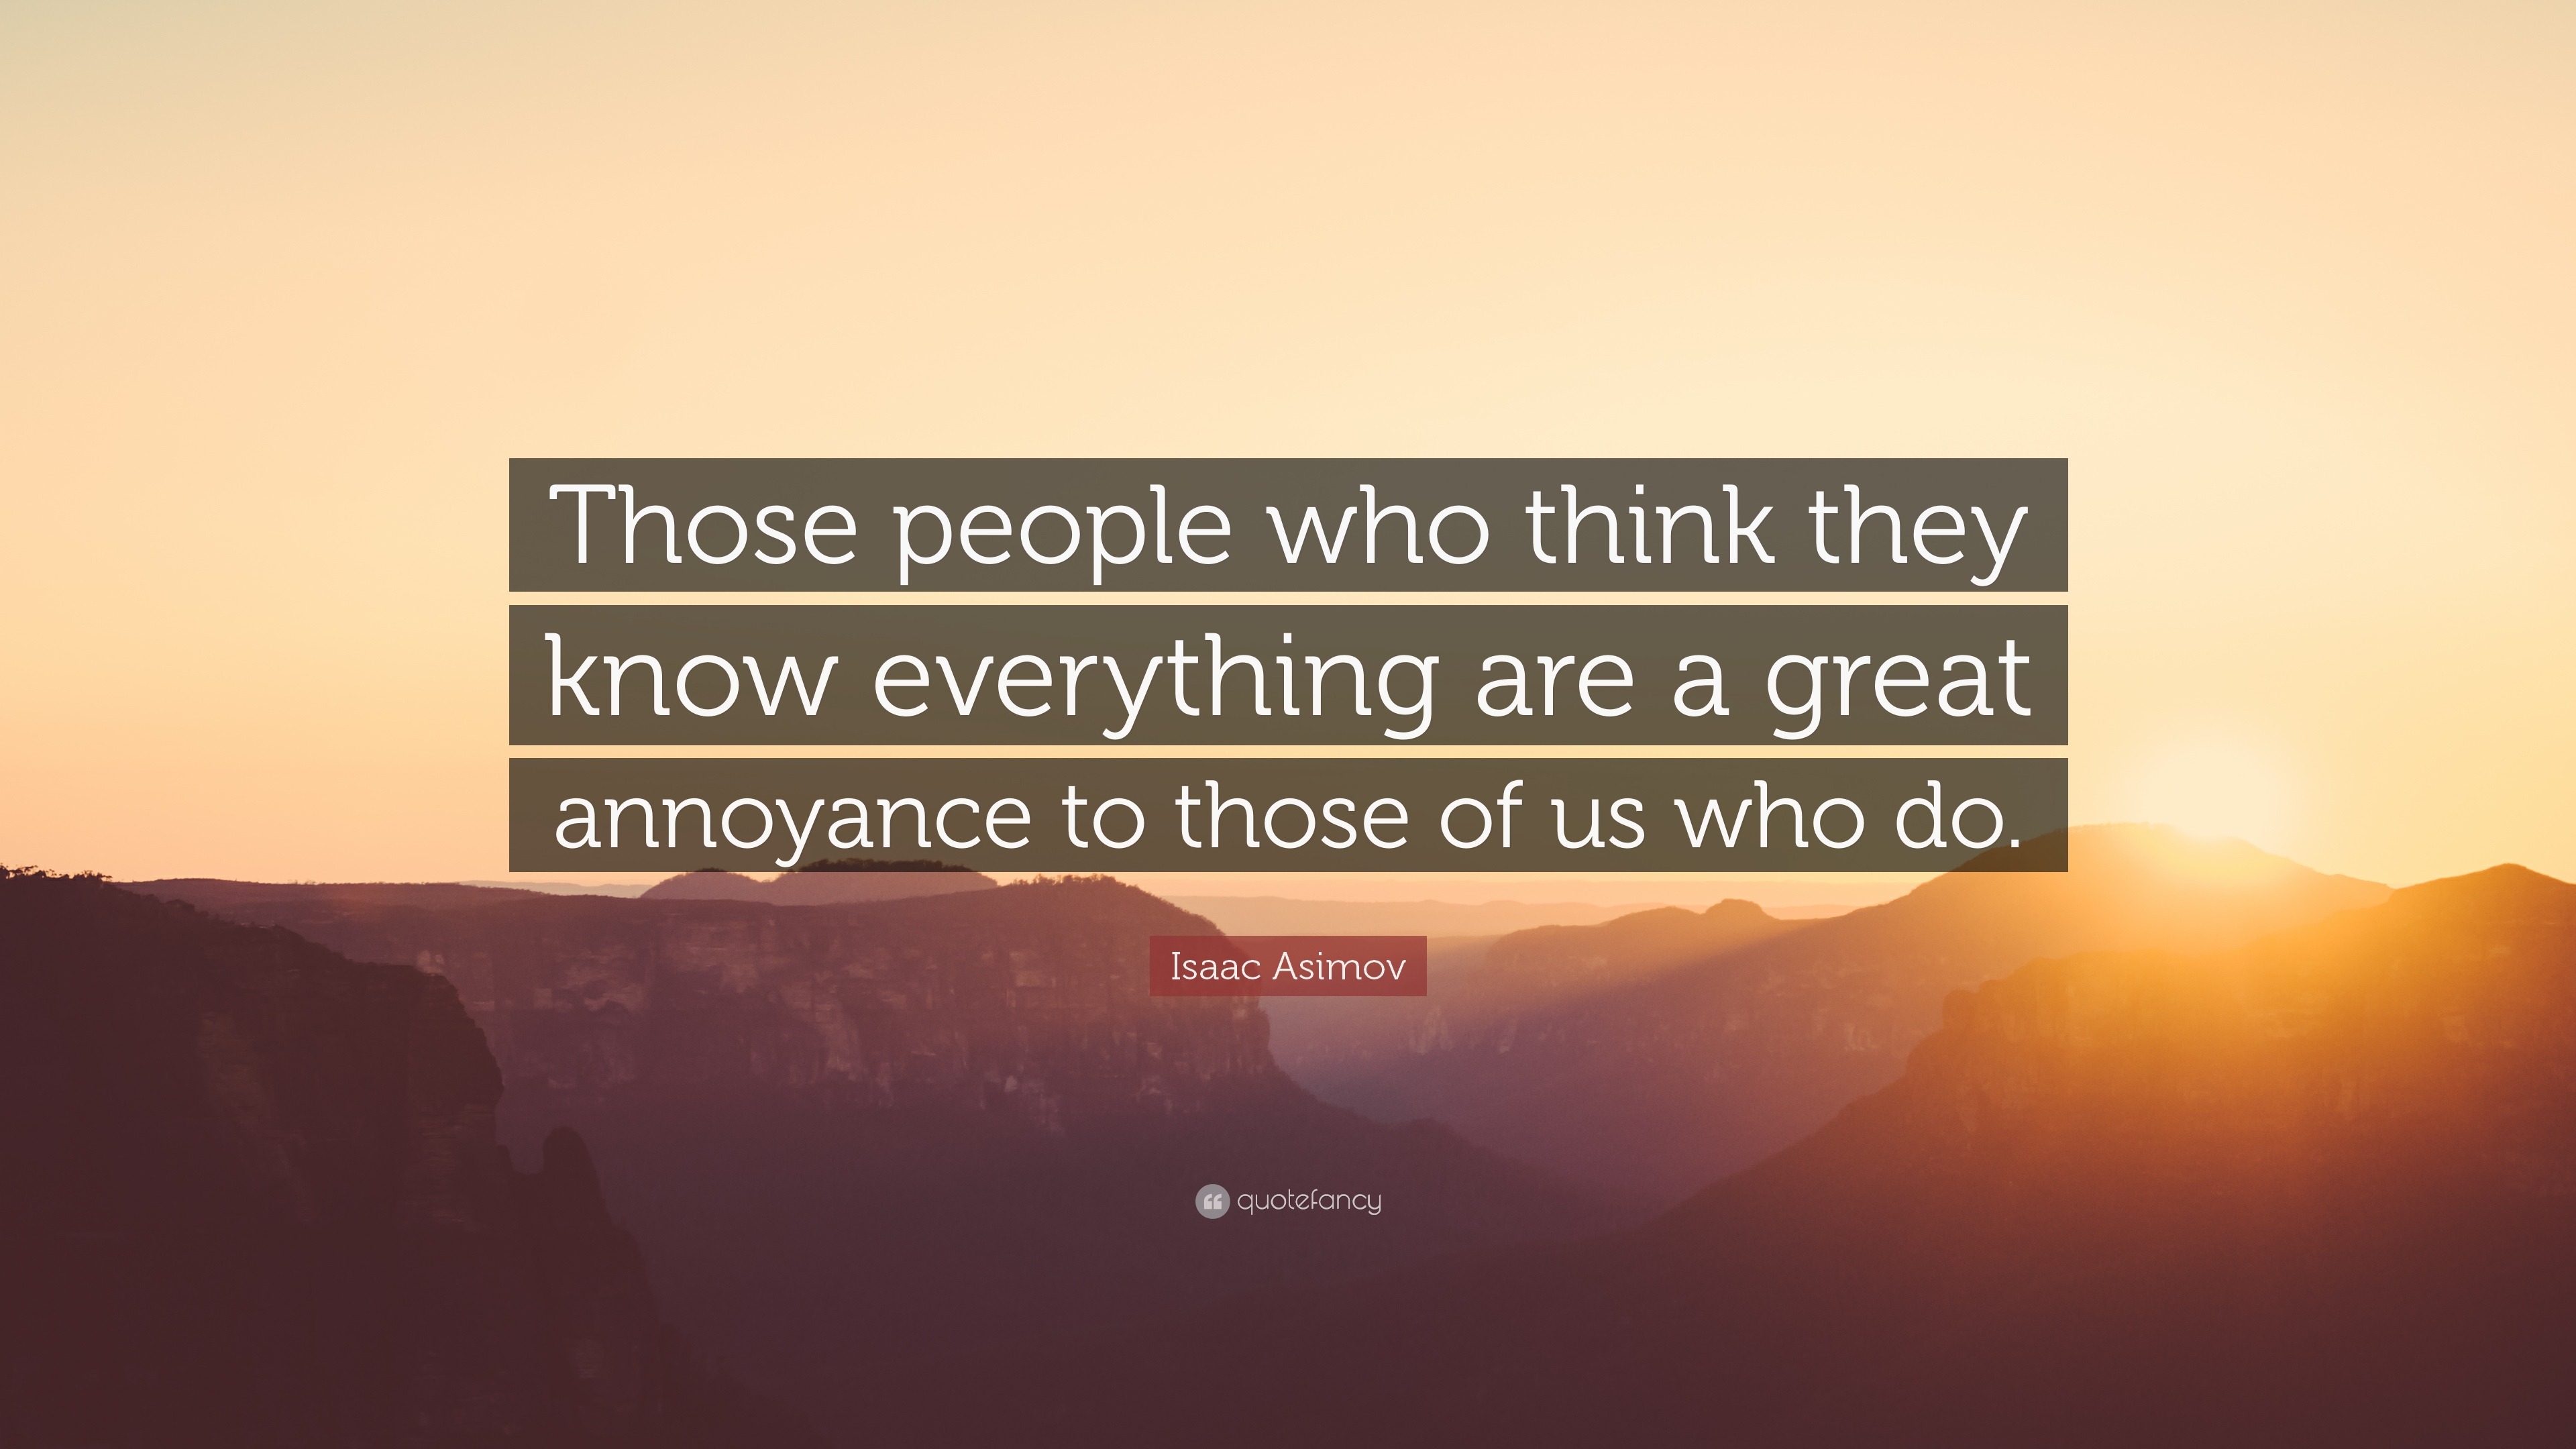 Isaac Asimov Quote: “Those people who think they know everything are a ...